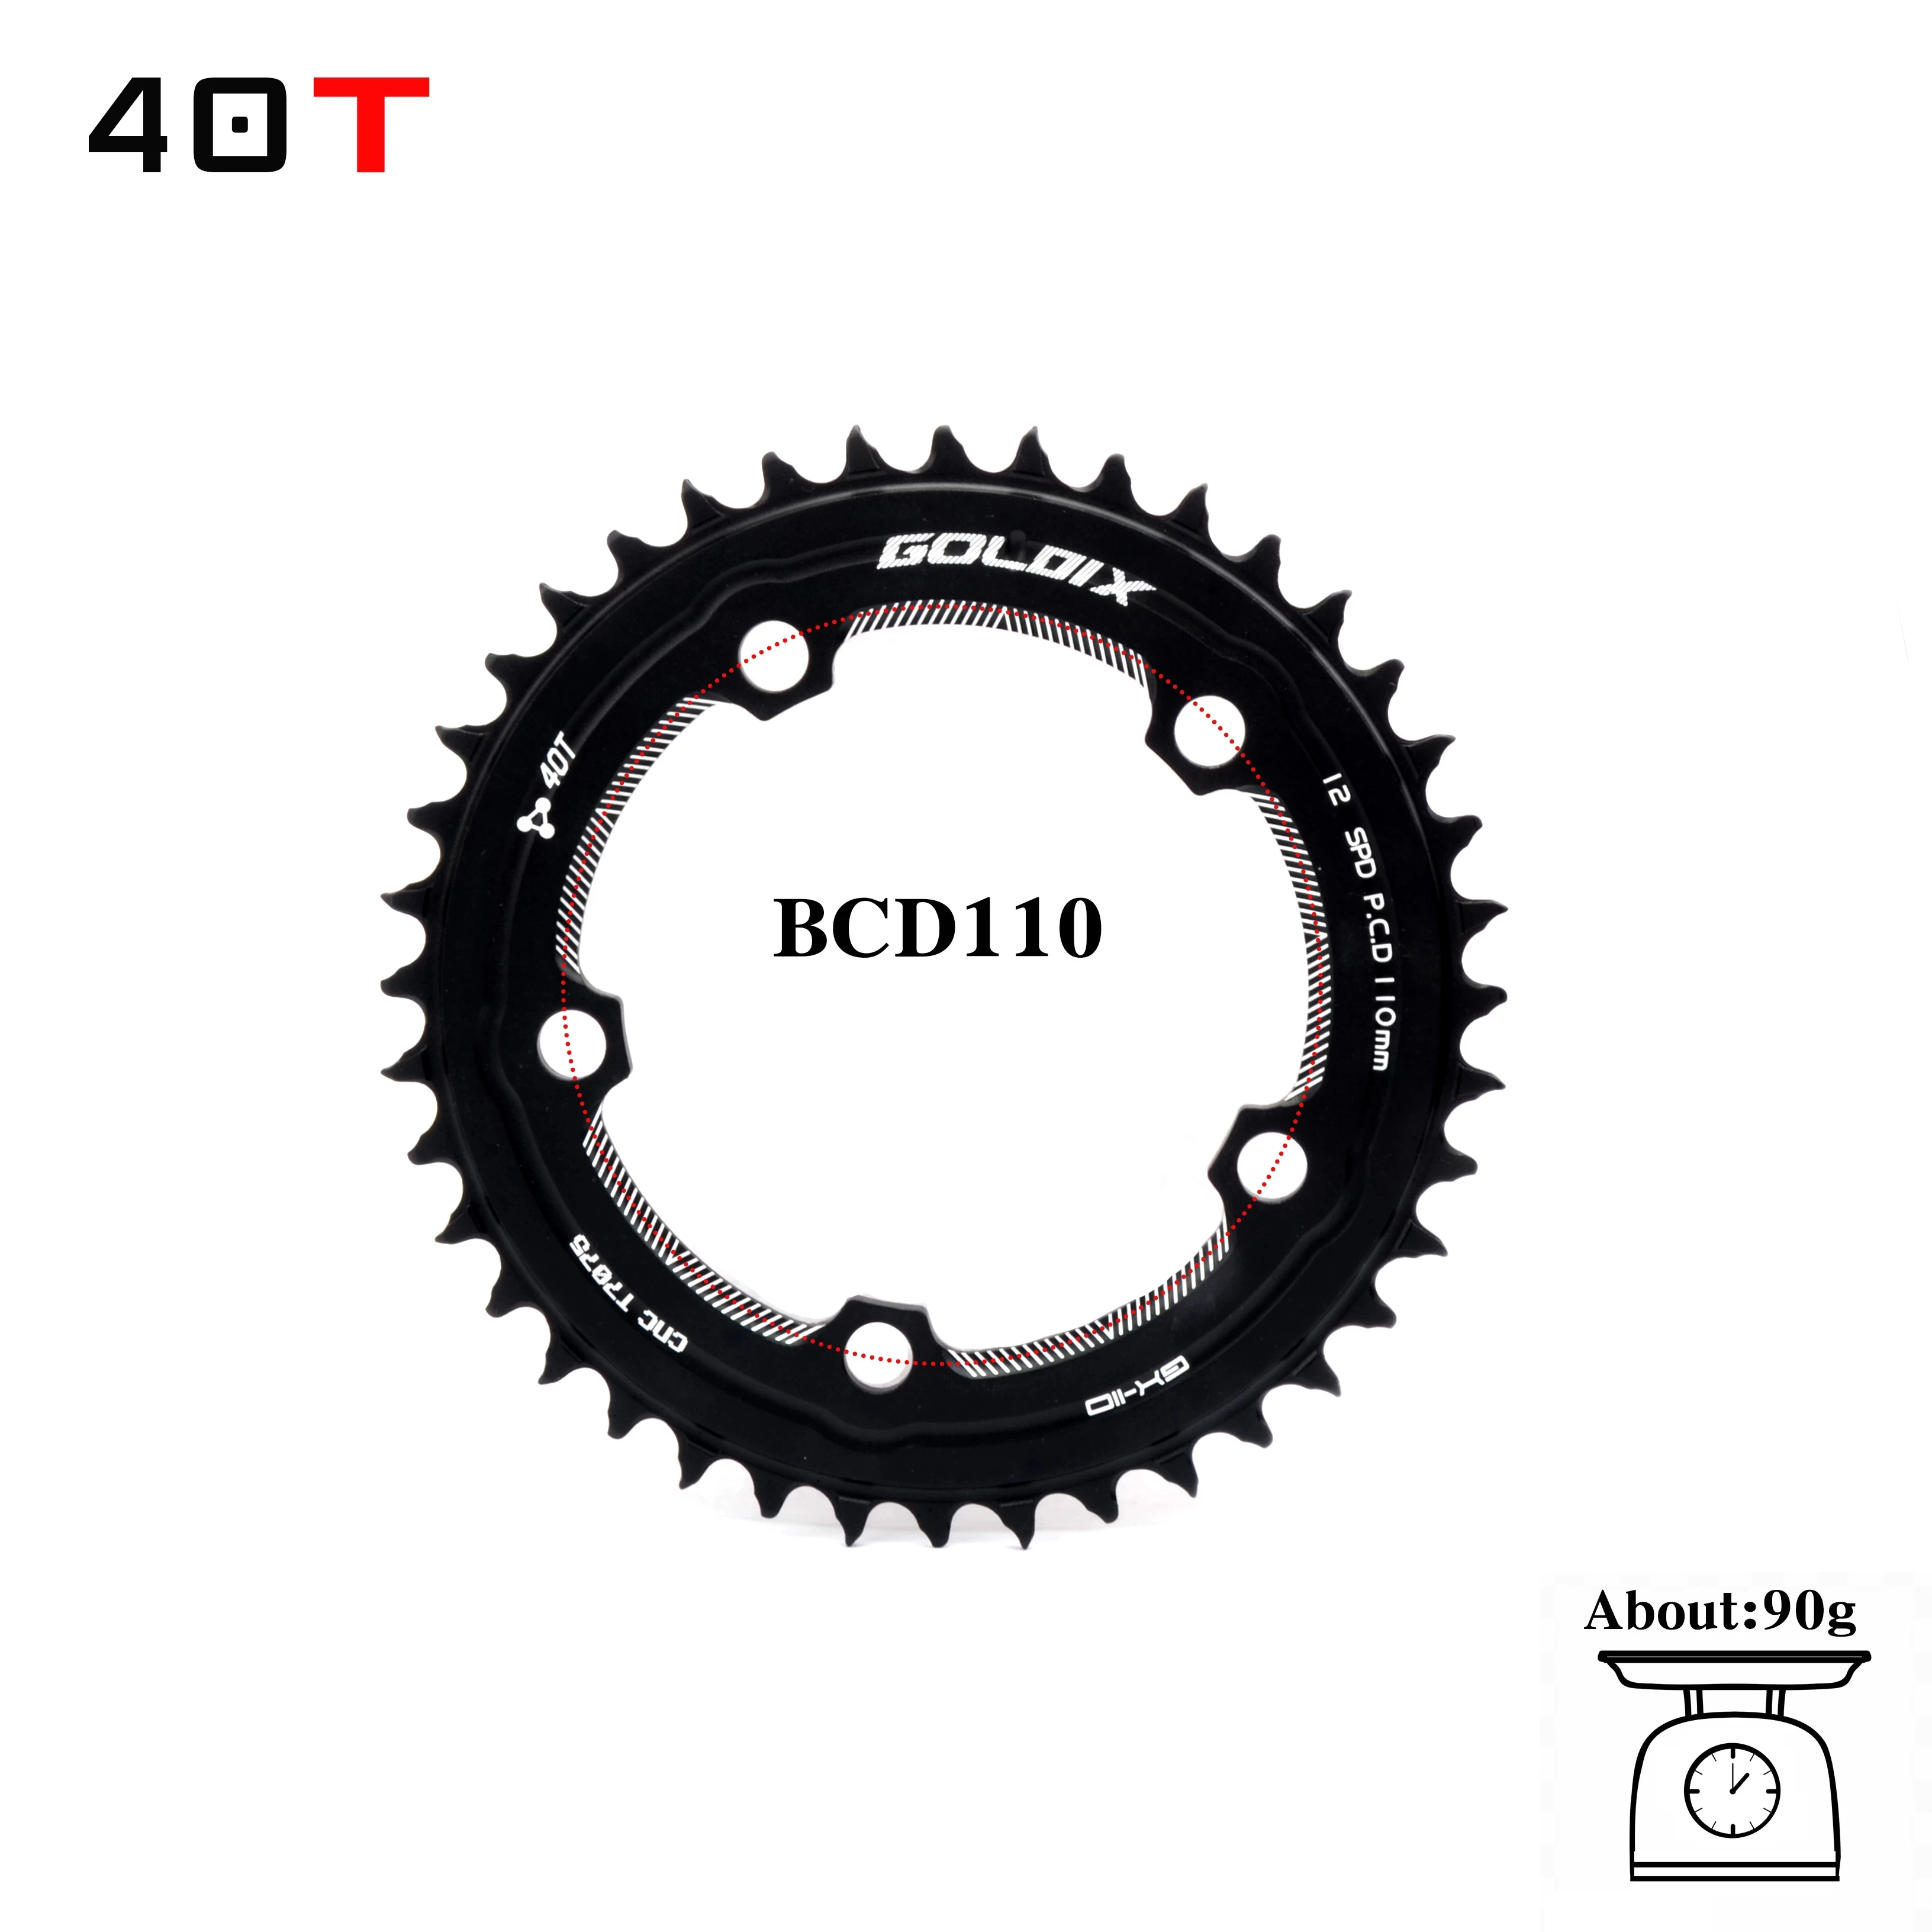 Details about   110 5 BCD 110BCD Road Bike Narrow Wide Chainring Bike Chainwheel 50-58t